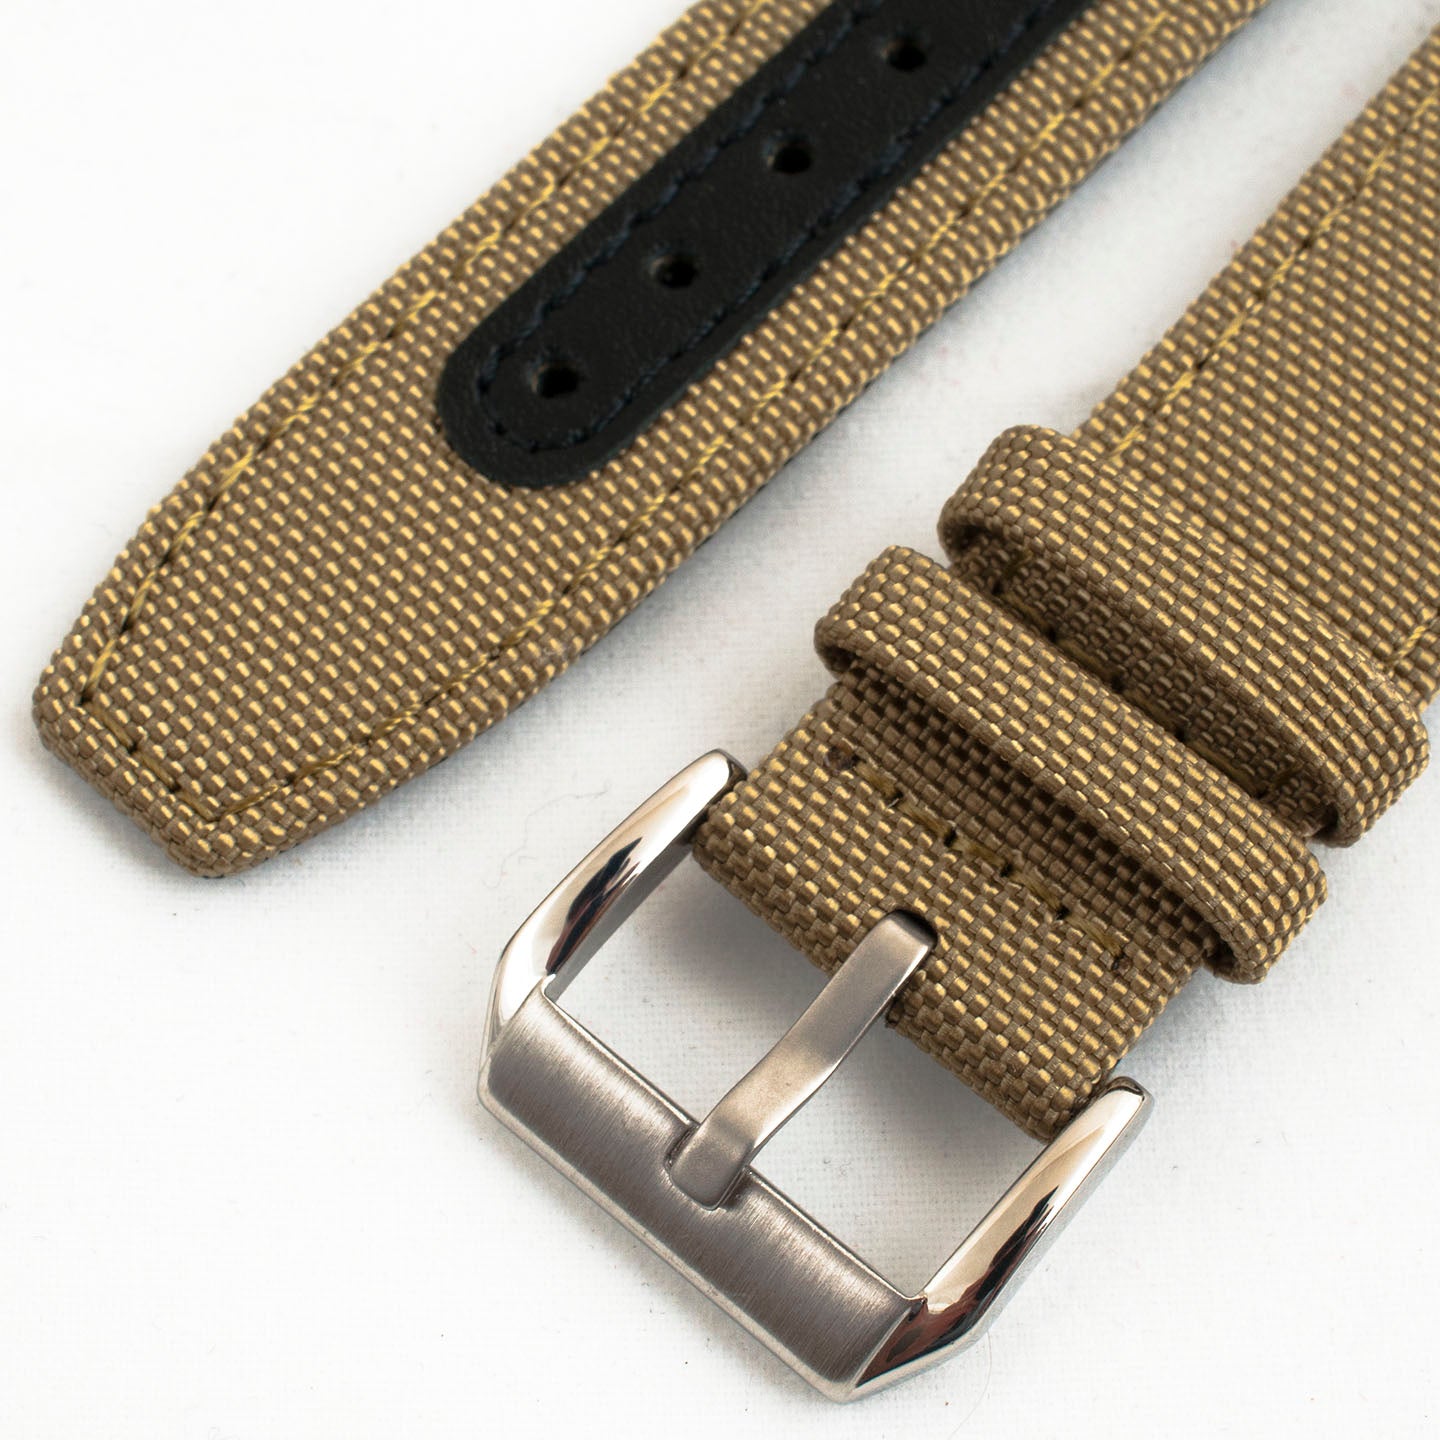 Premium Sailcloth quick release watch strap band replacement 19mm, 20mm, 21mm, 22mm khaki tan beige brown sand